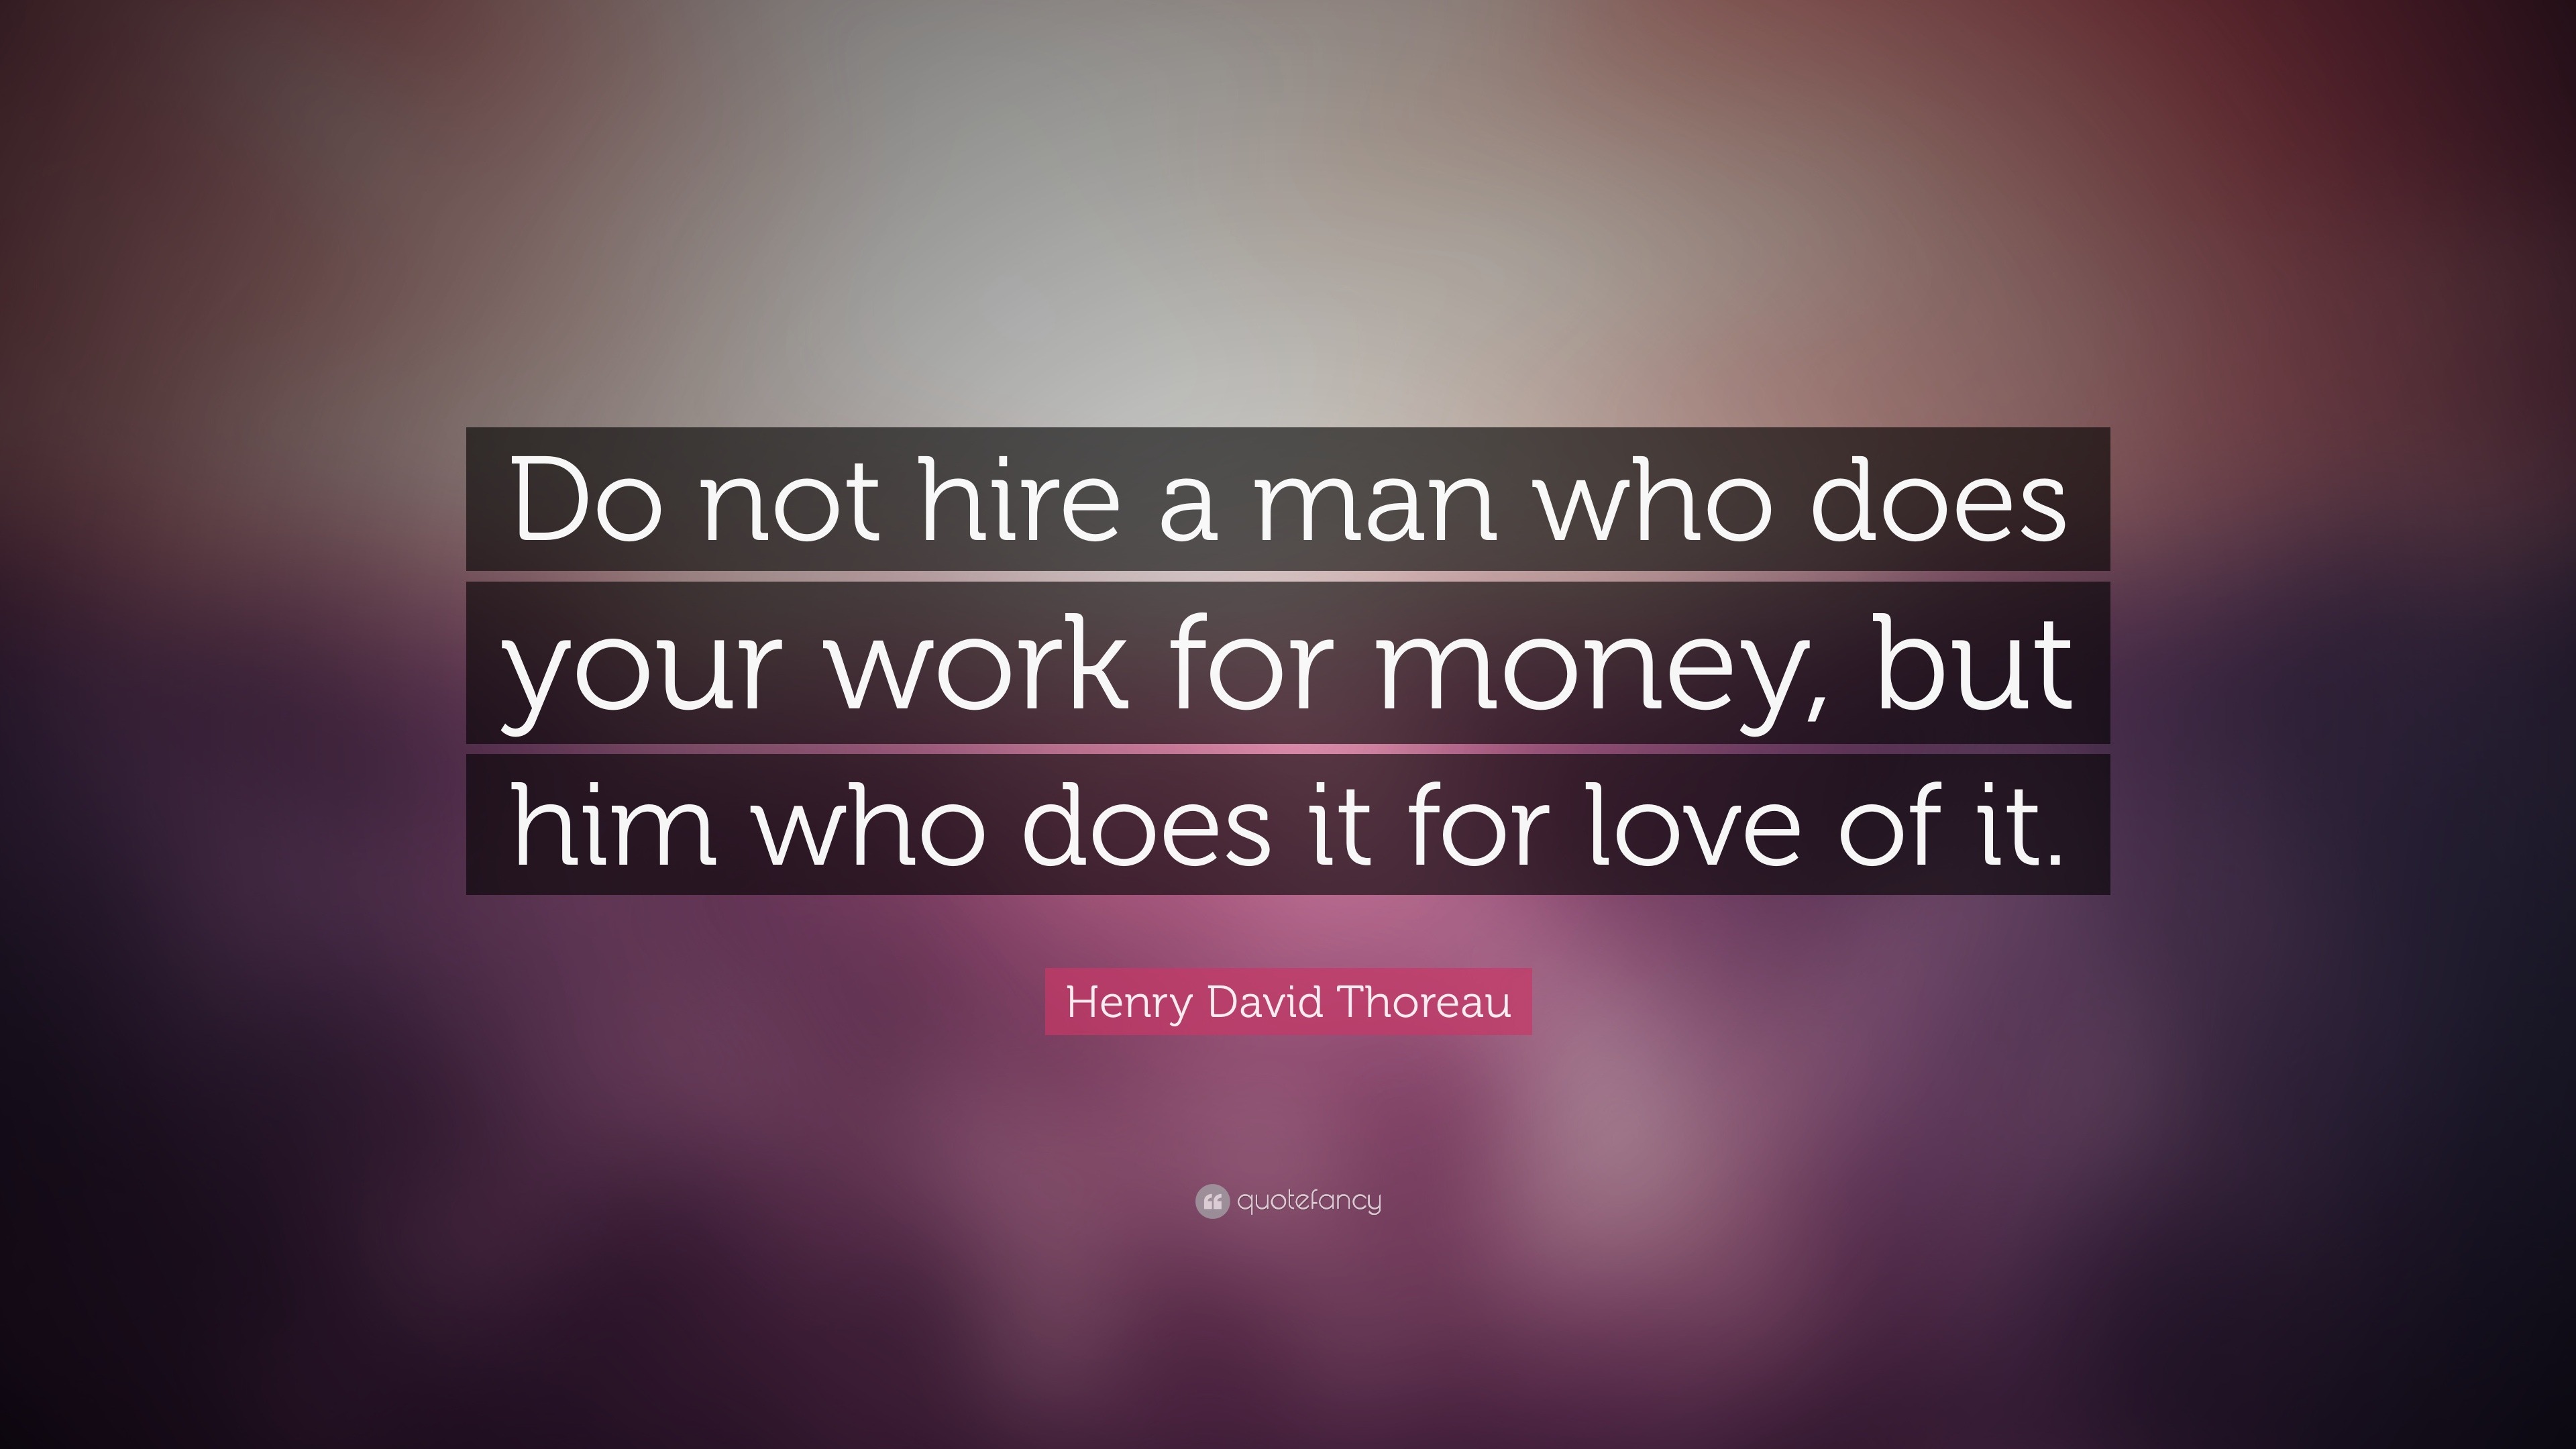 Henry David Thoreau Quote: “Do not hire a man who does your work for money,  but